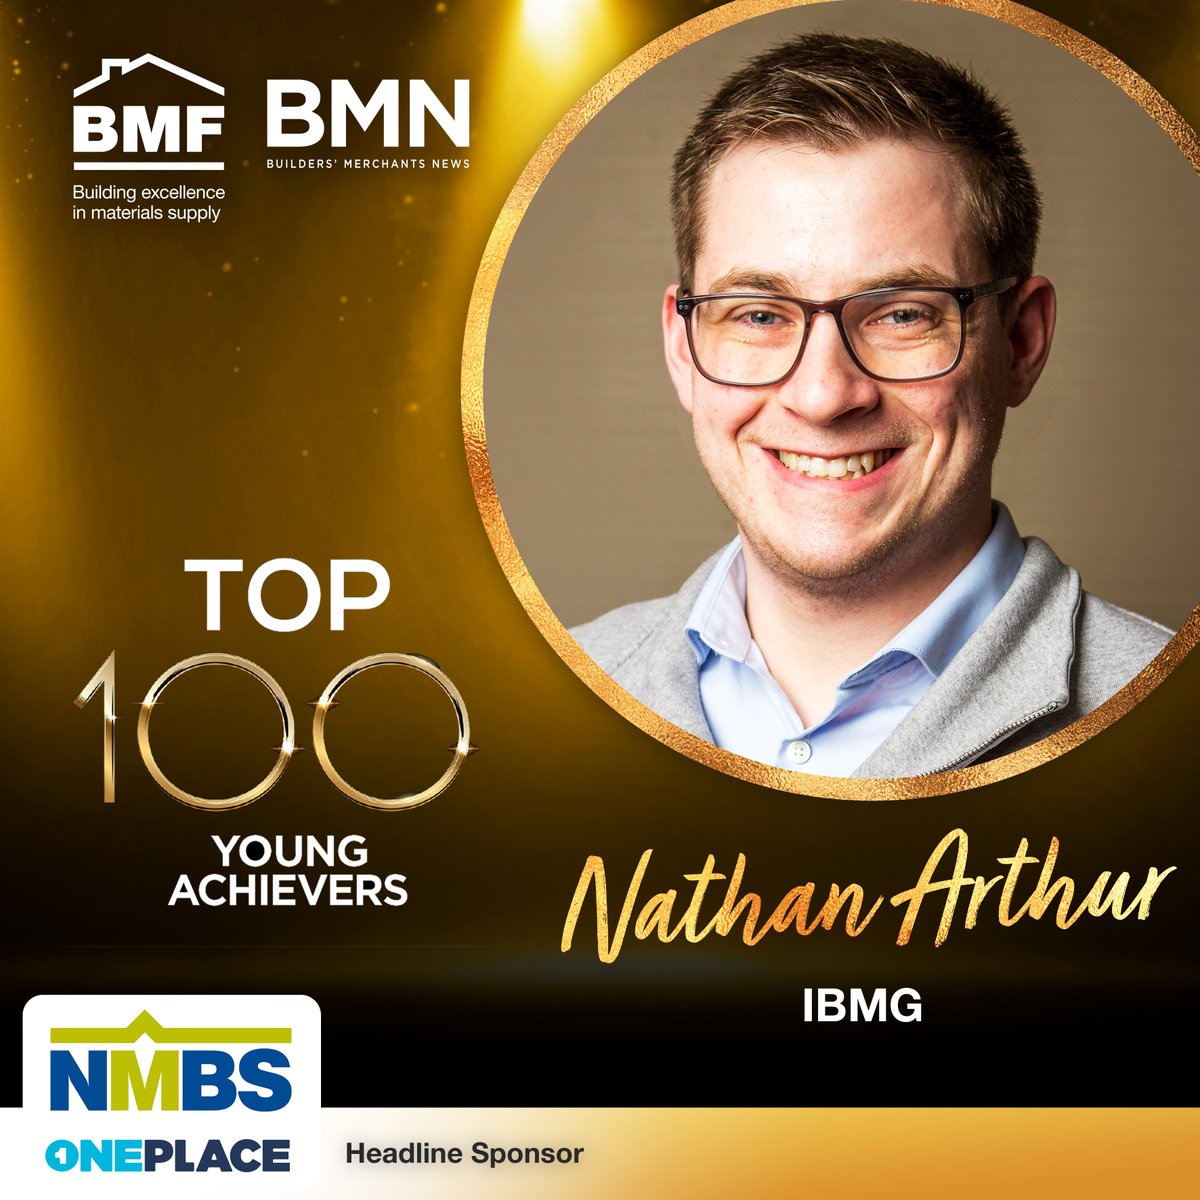 Today’s BMF and @BMerchantsNews Top 100 Young Achievers is Nathan Arthur, Group Head of Mergers and Acquisitions at Independent Builders Merchant Group. Head sponsor, @NationalMerch #Top100YoungAchiever